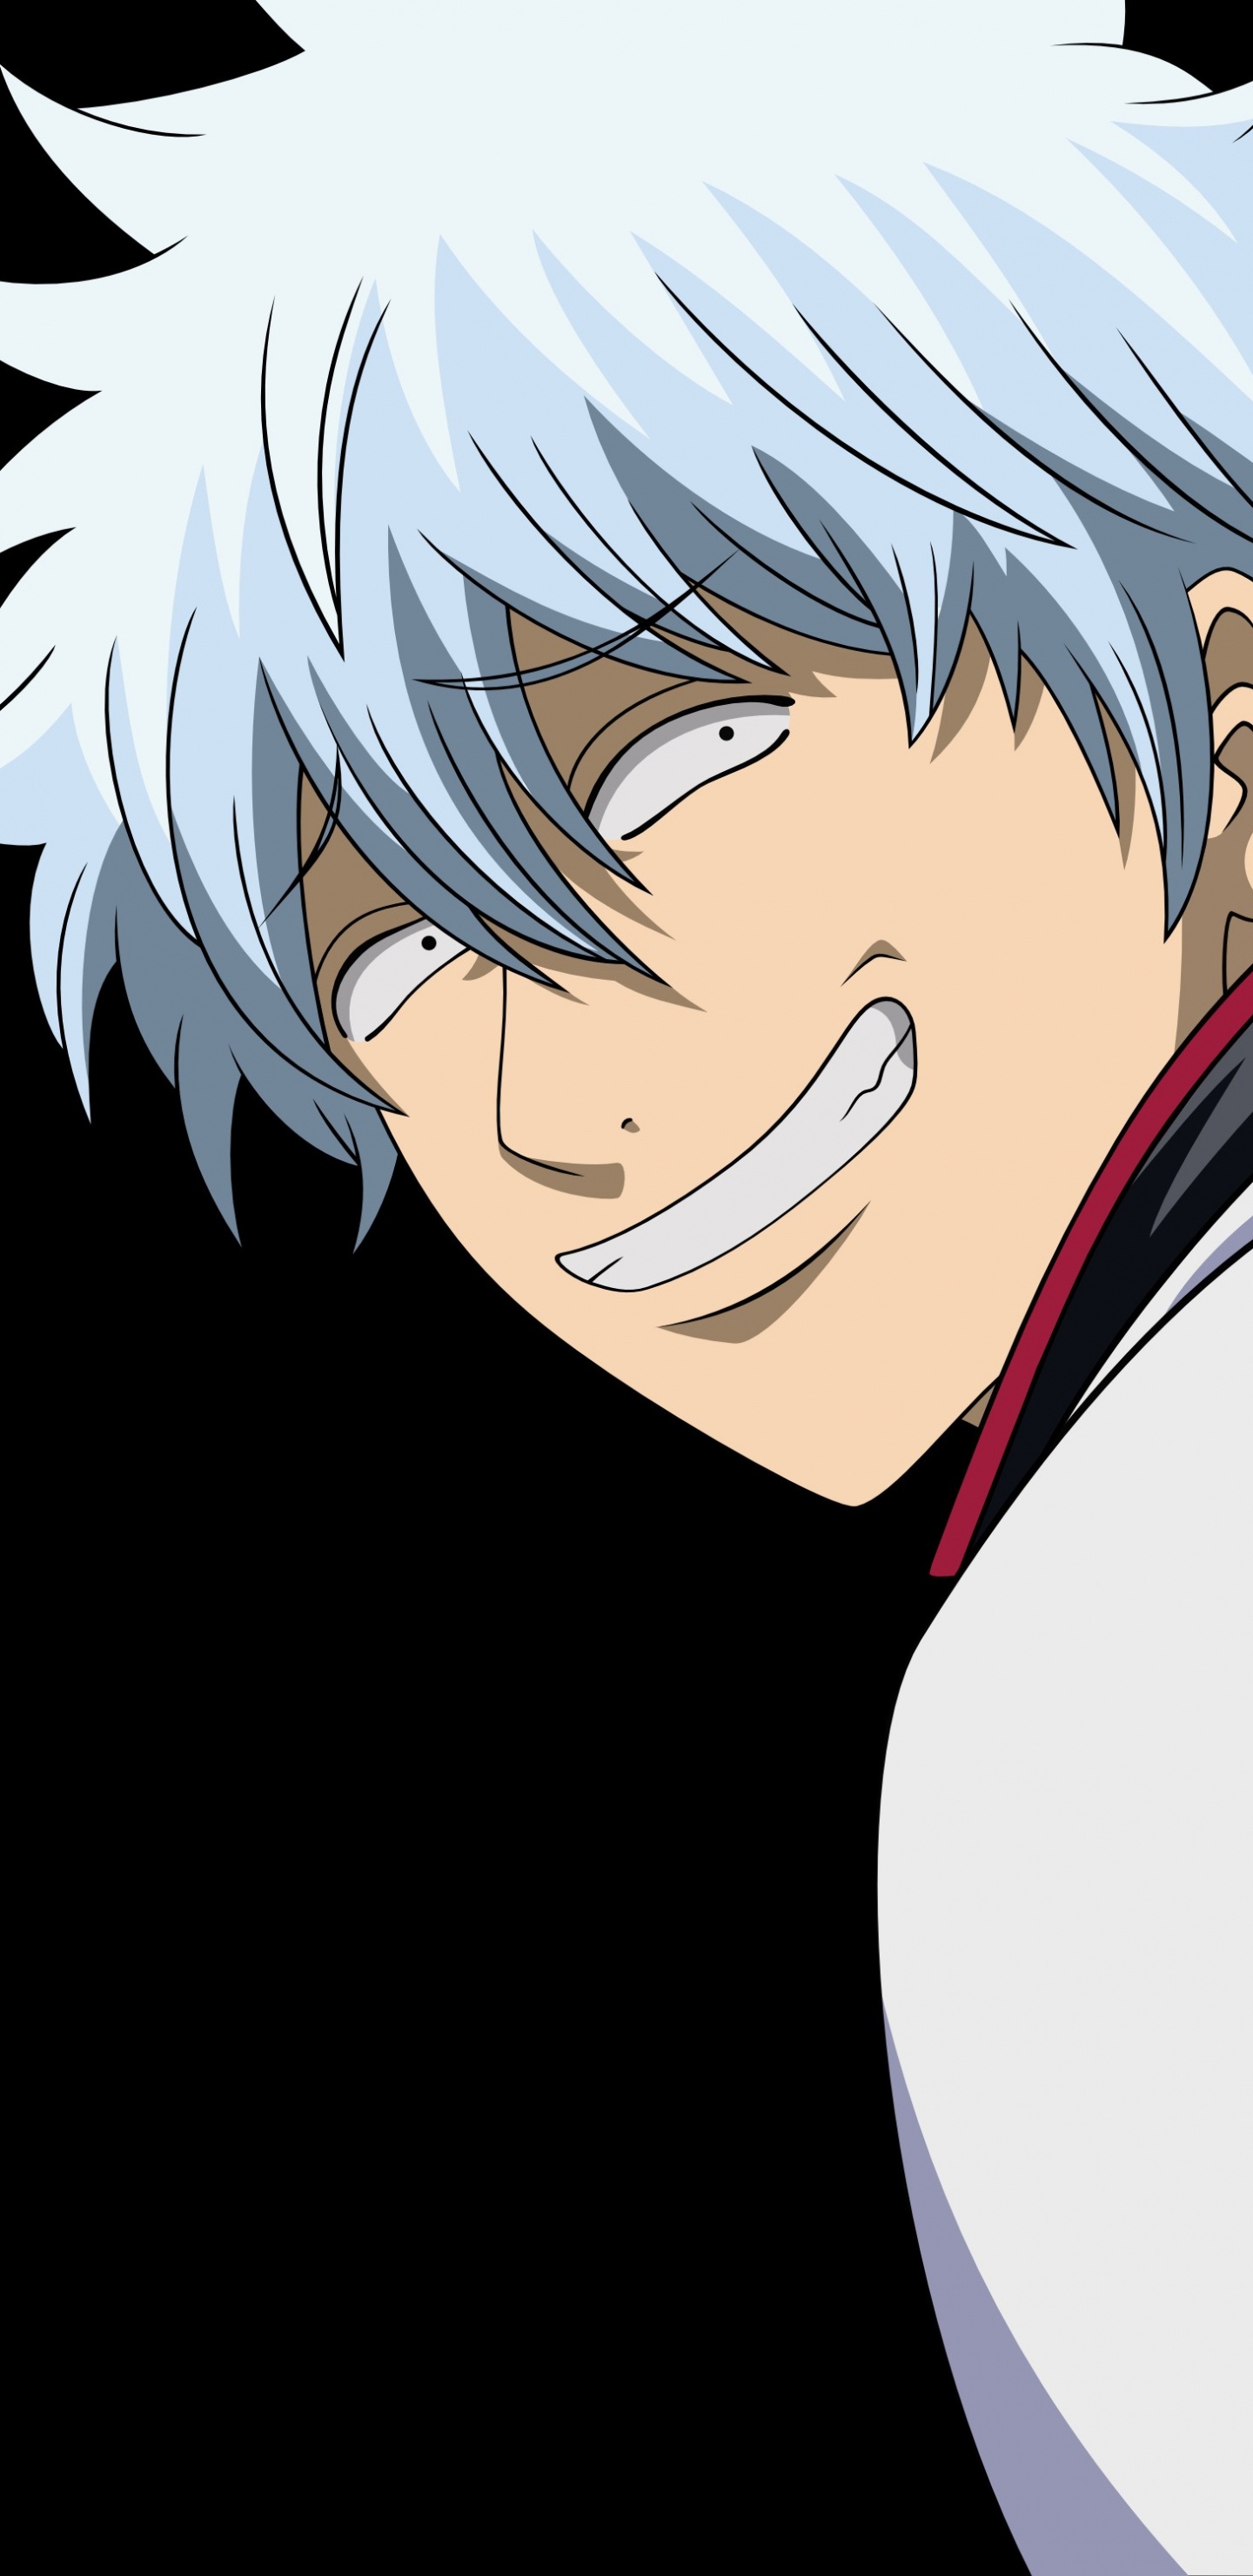 White Haired Male Anime Character. Wallpaper in 1440x2960 Resolution